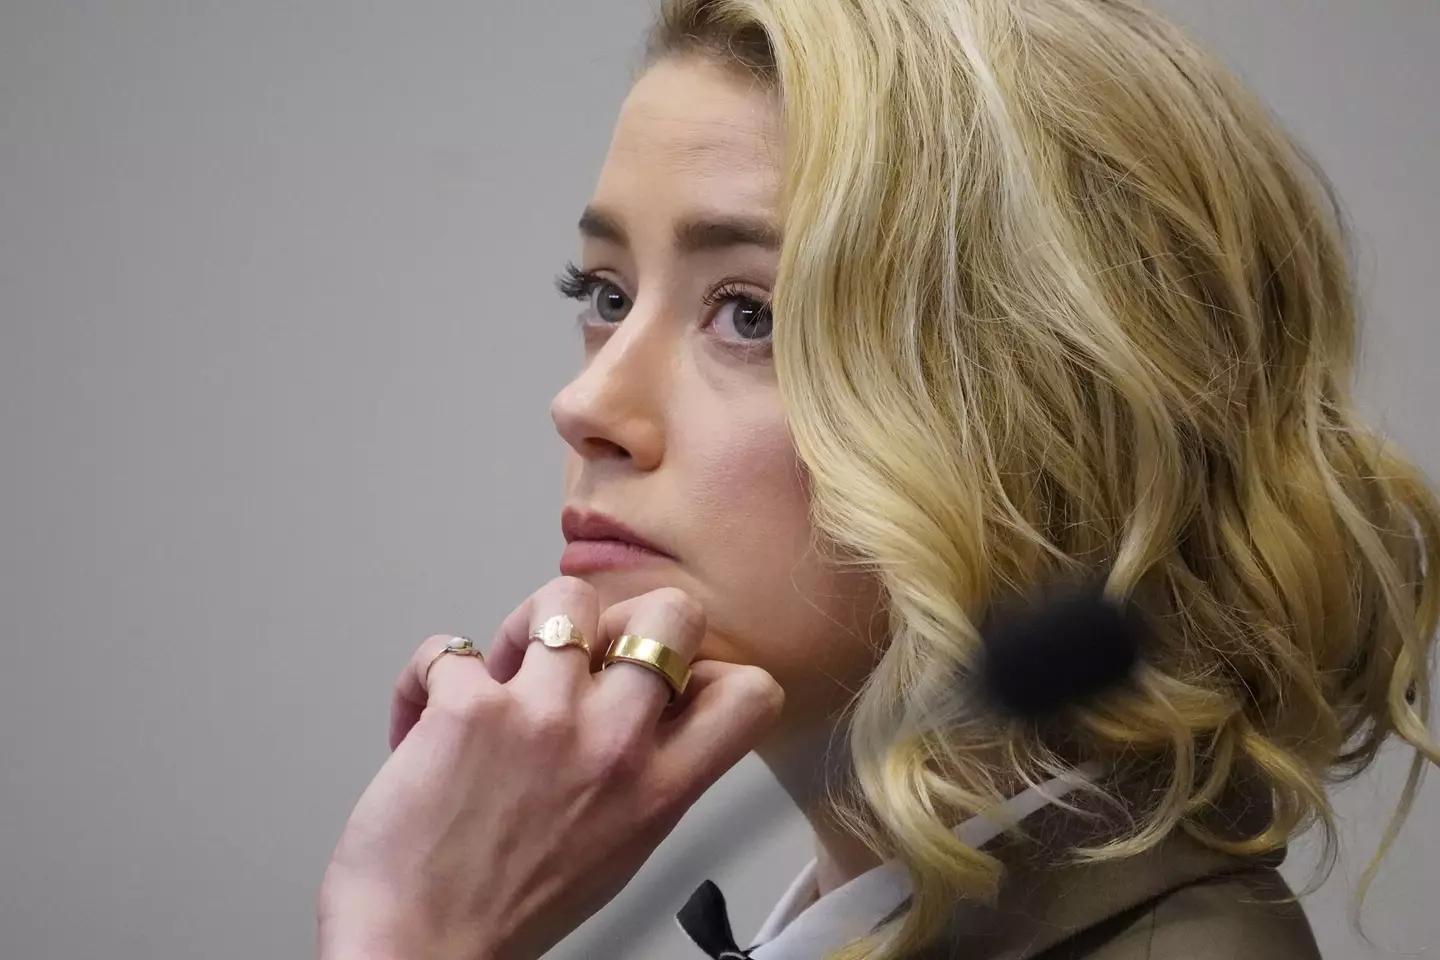 The update to their case comes as Amber Heard had previously rested her case just days ago (Alamy).